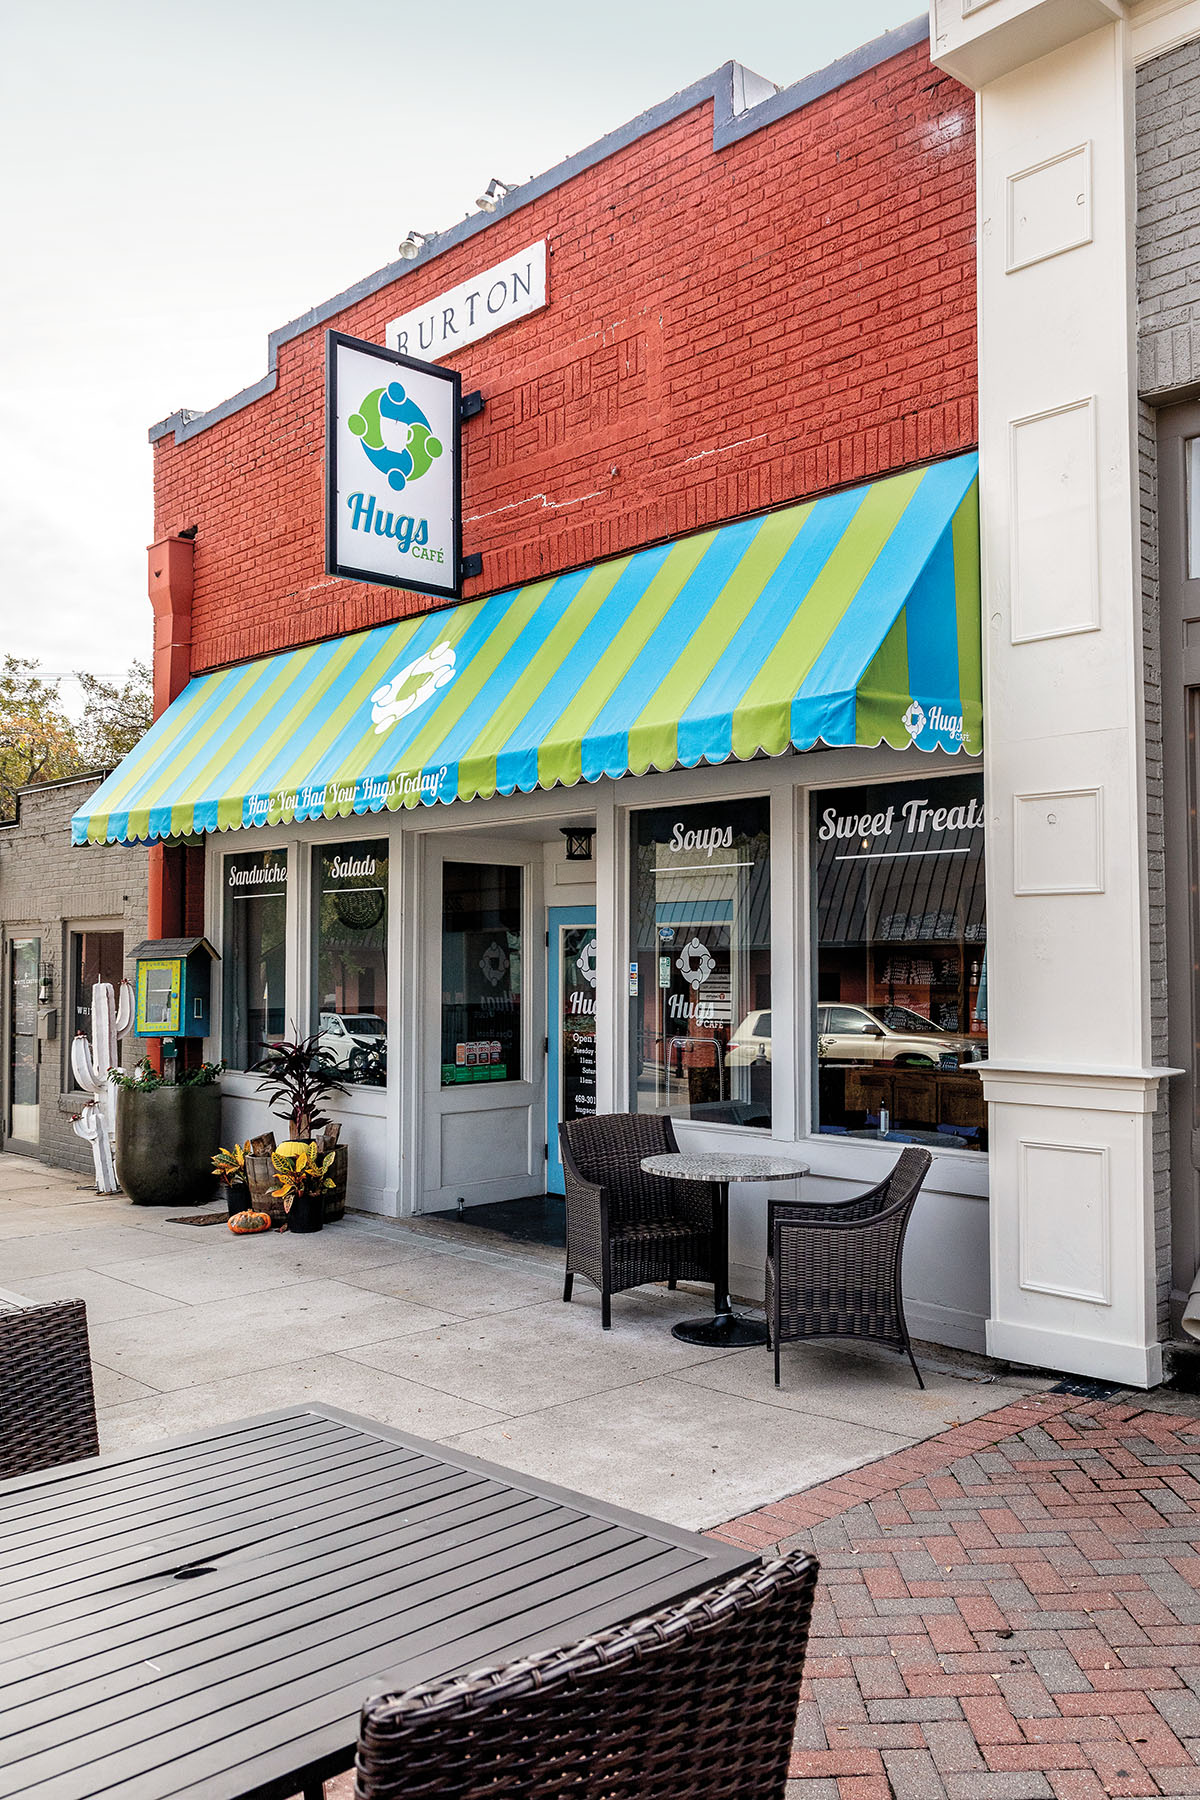 A bright blue and green-striped awning adorns the outside of a red brick building with a sign reading "Hugs Cafe"